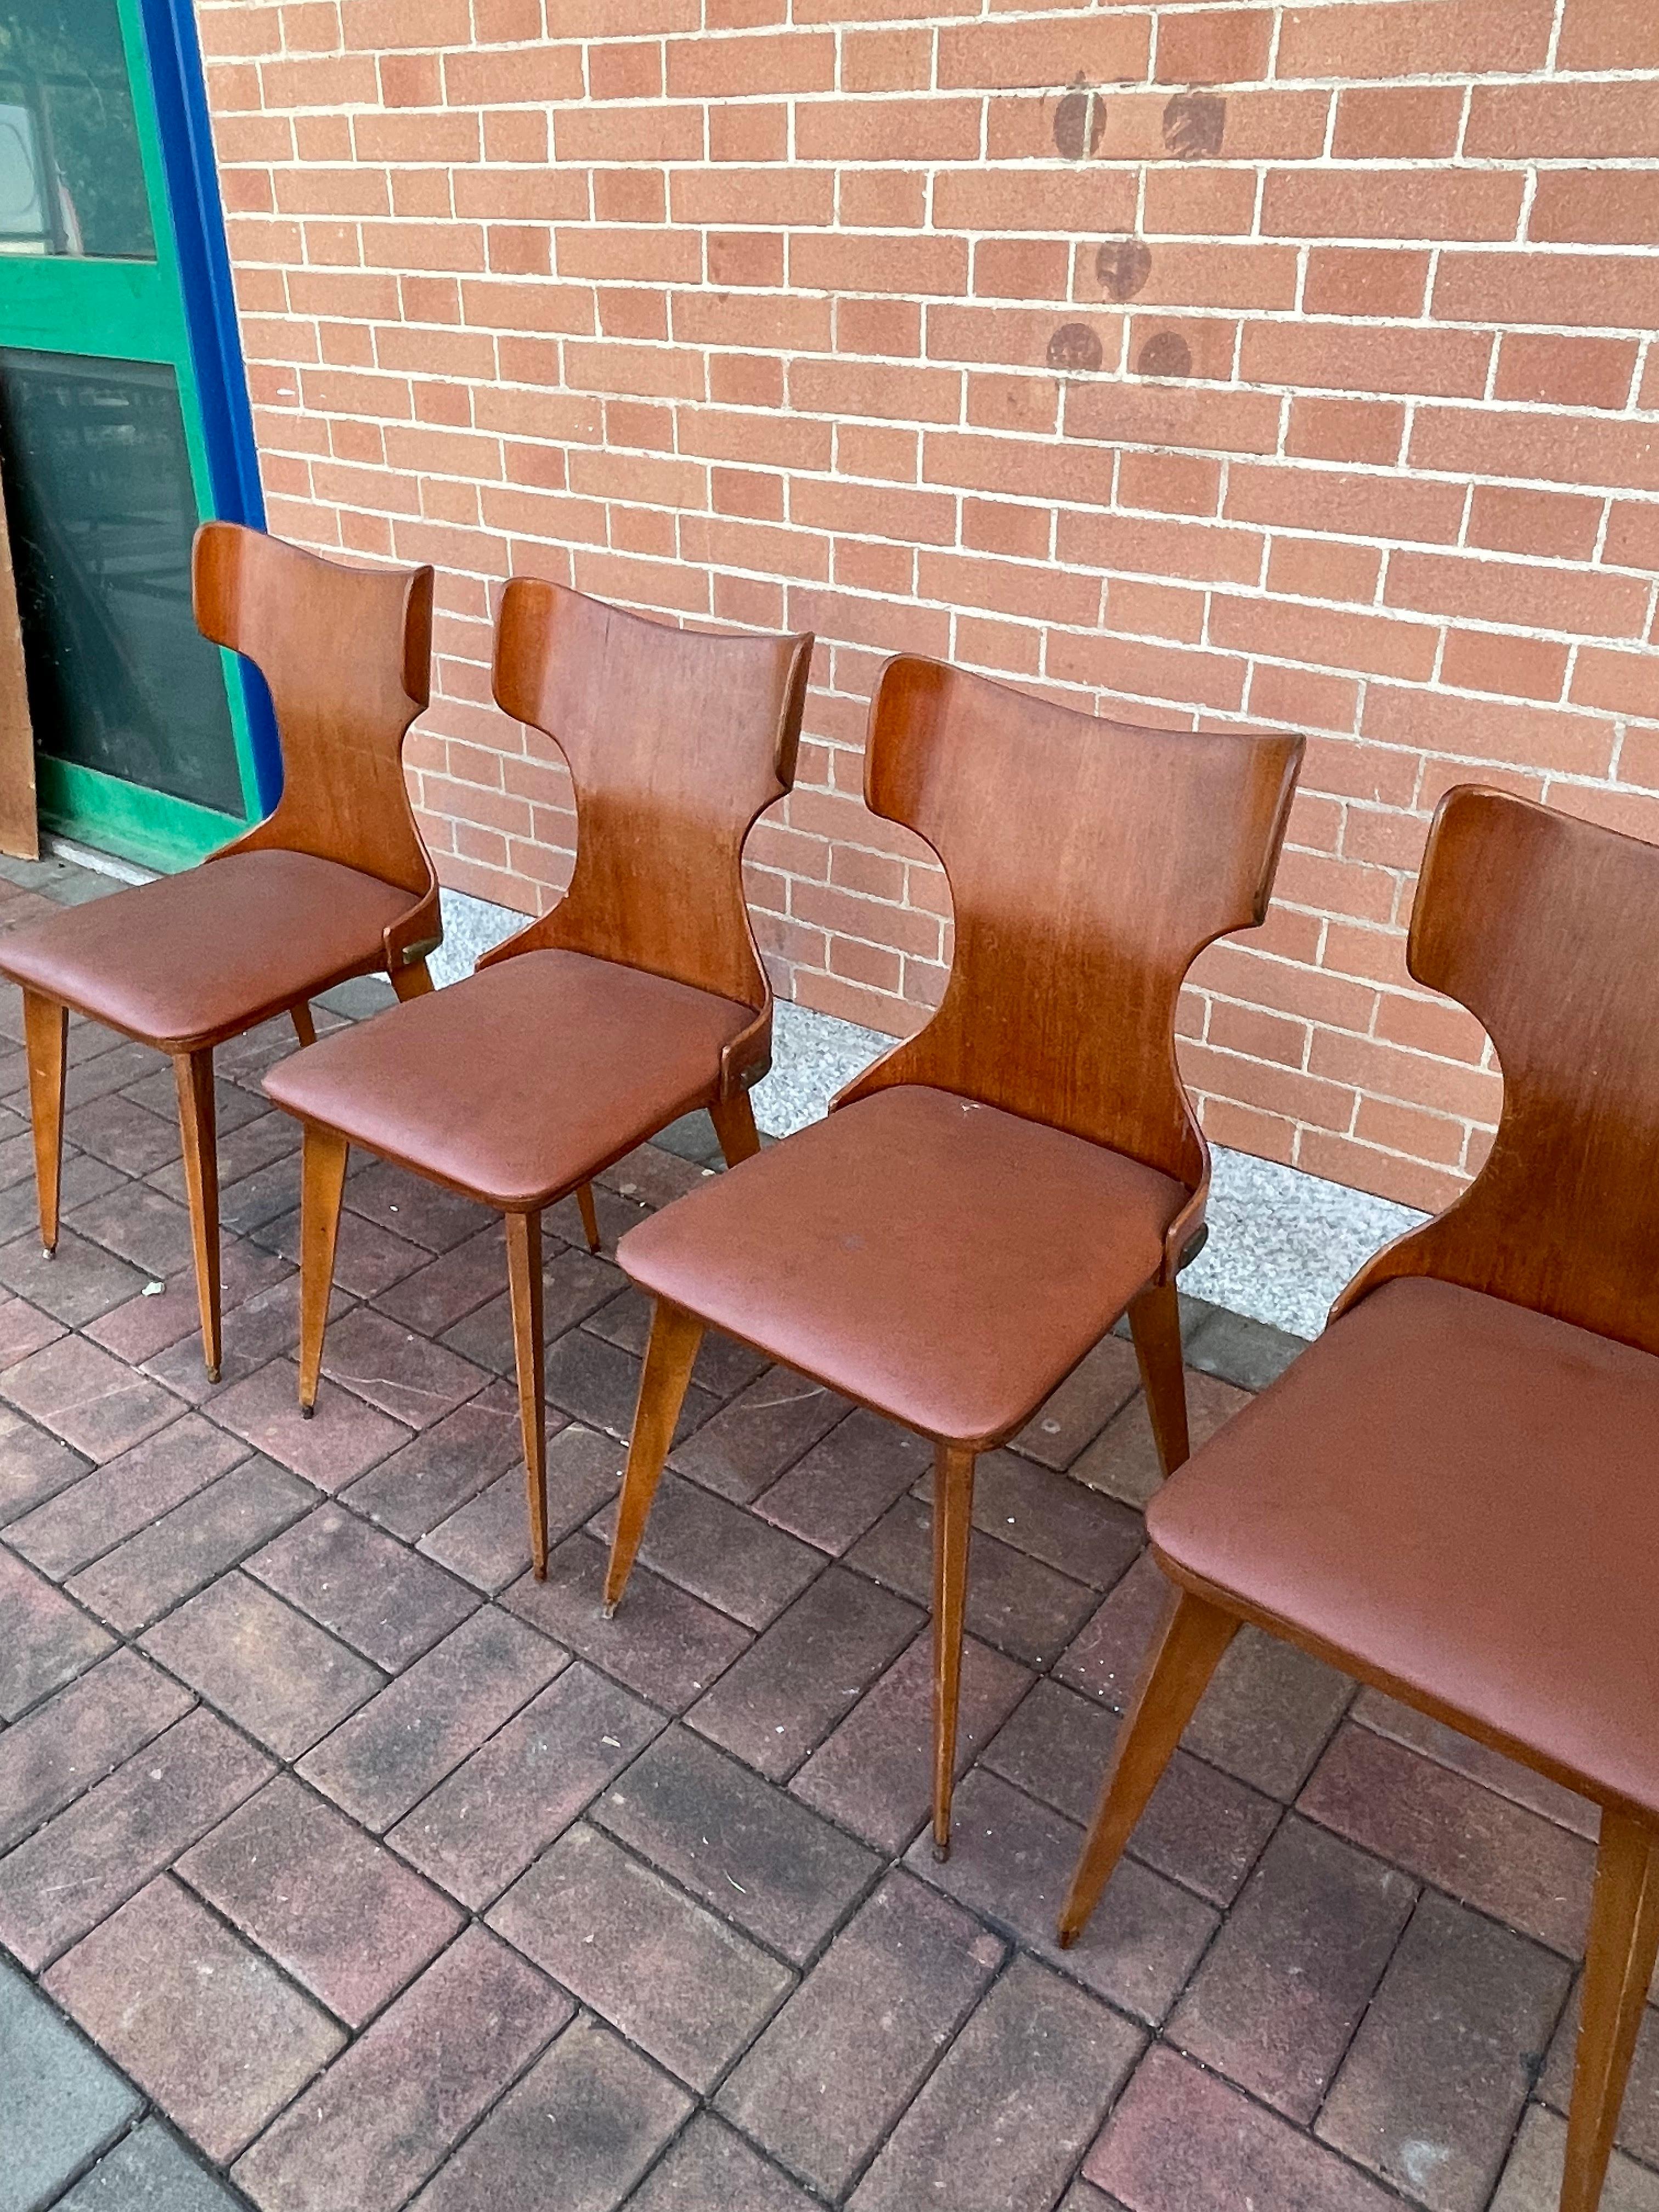 Italian Set of 4 curved chairs by Carlo Ratti, 50s, Italy